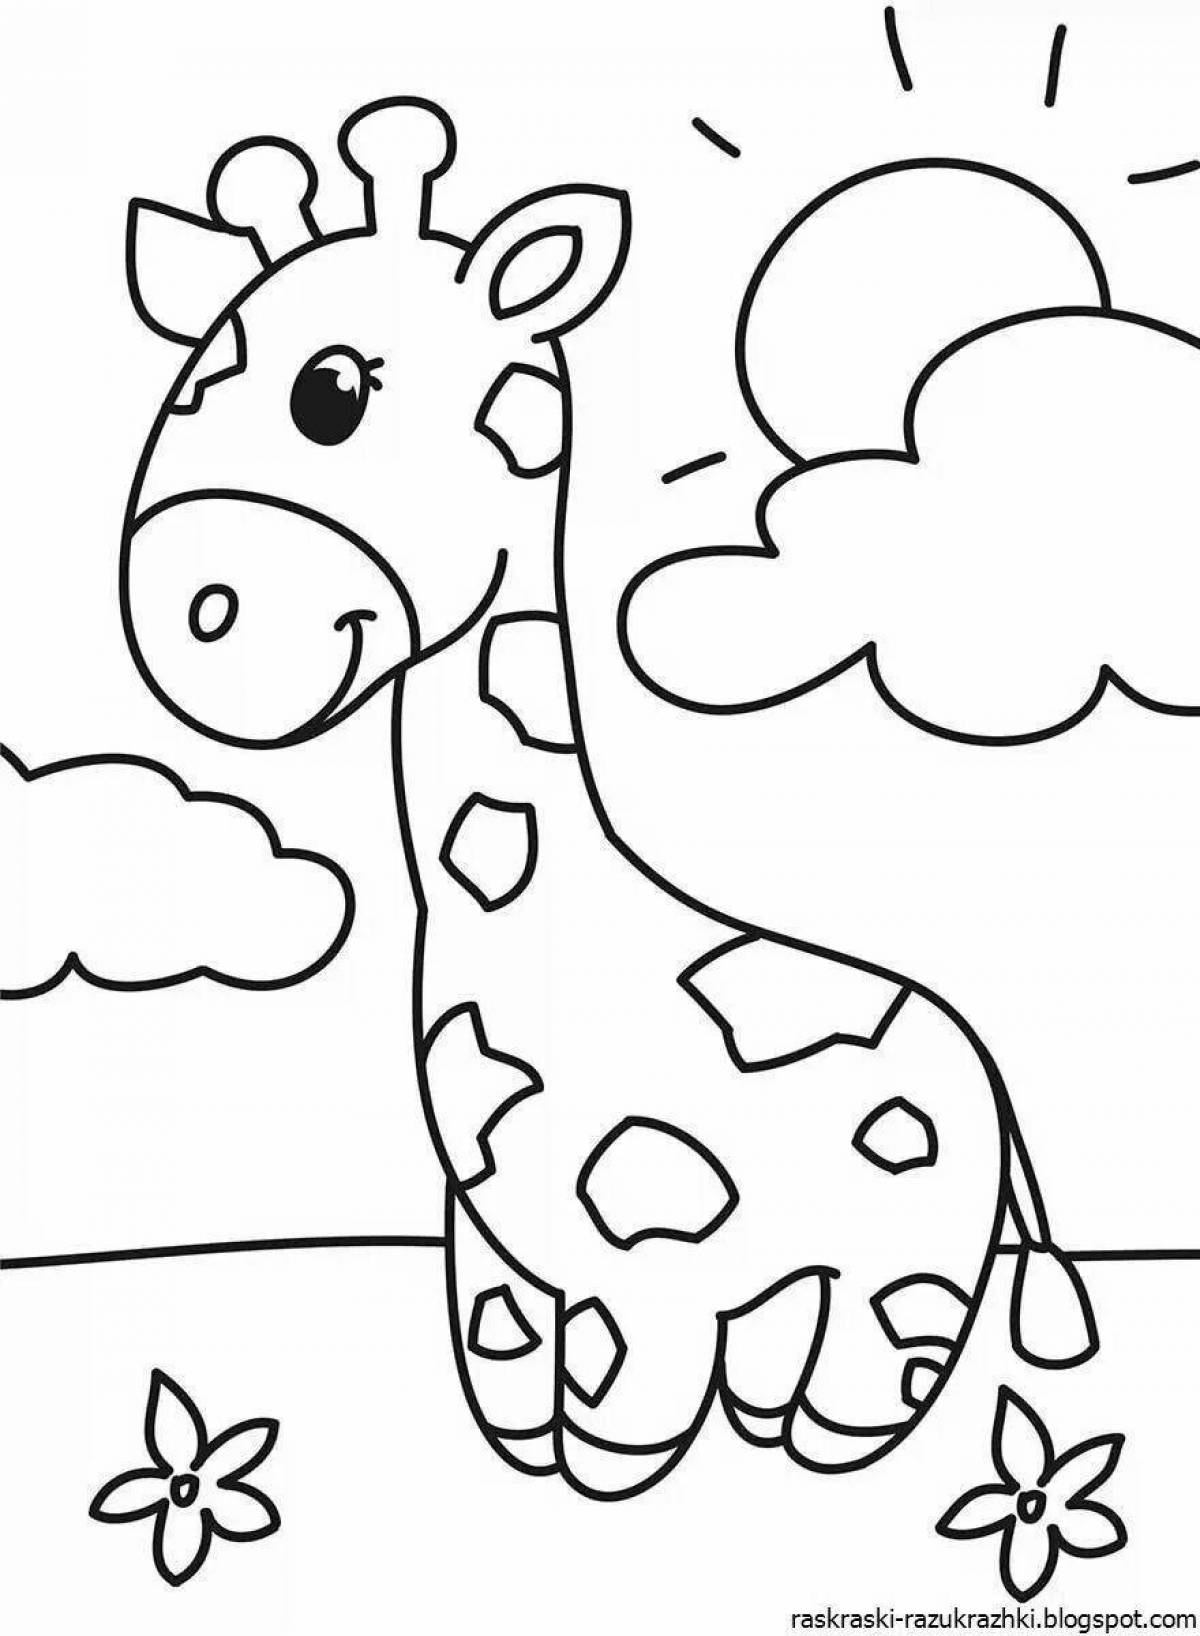 Bright coloring for children 3 years old animals